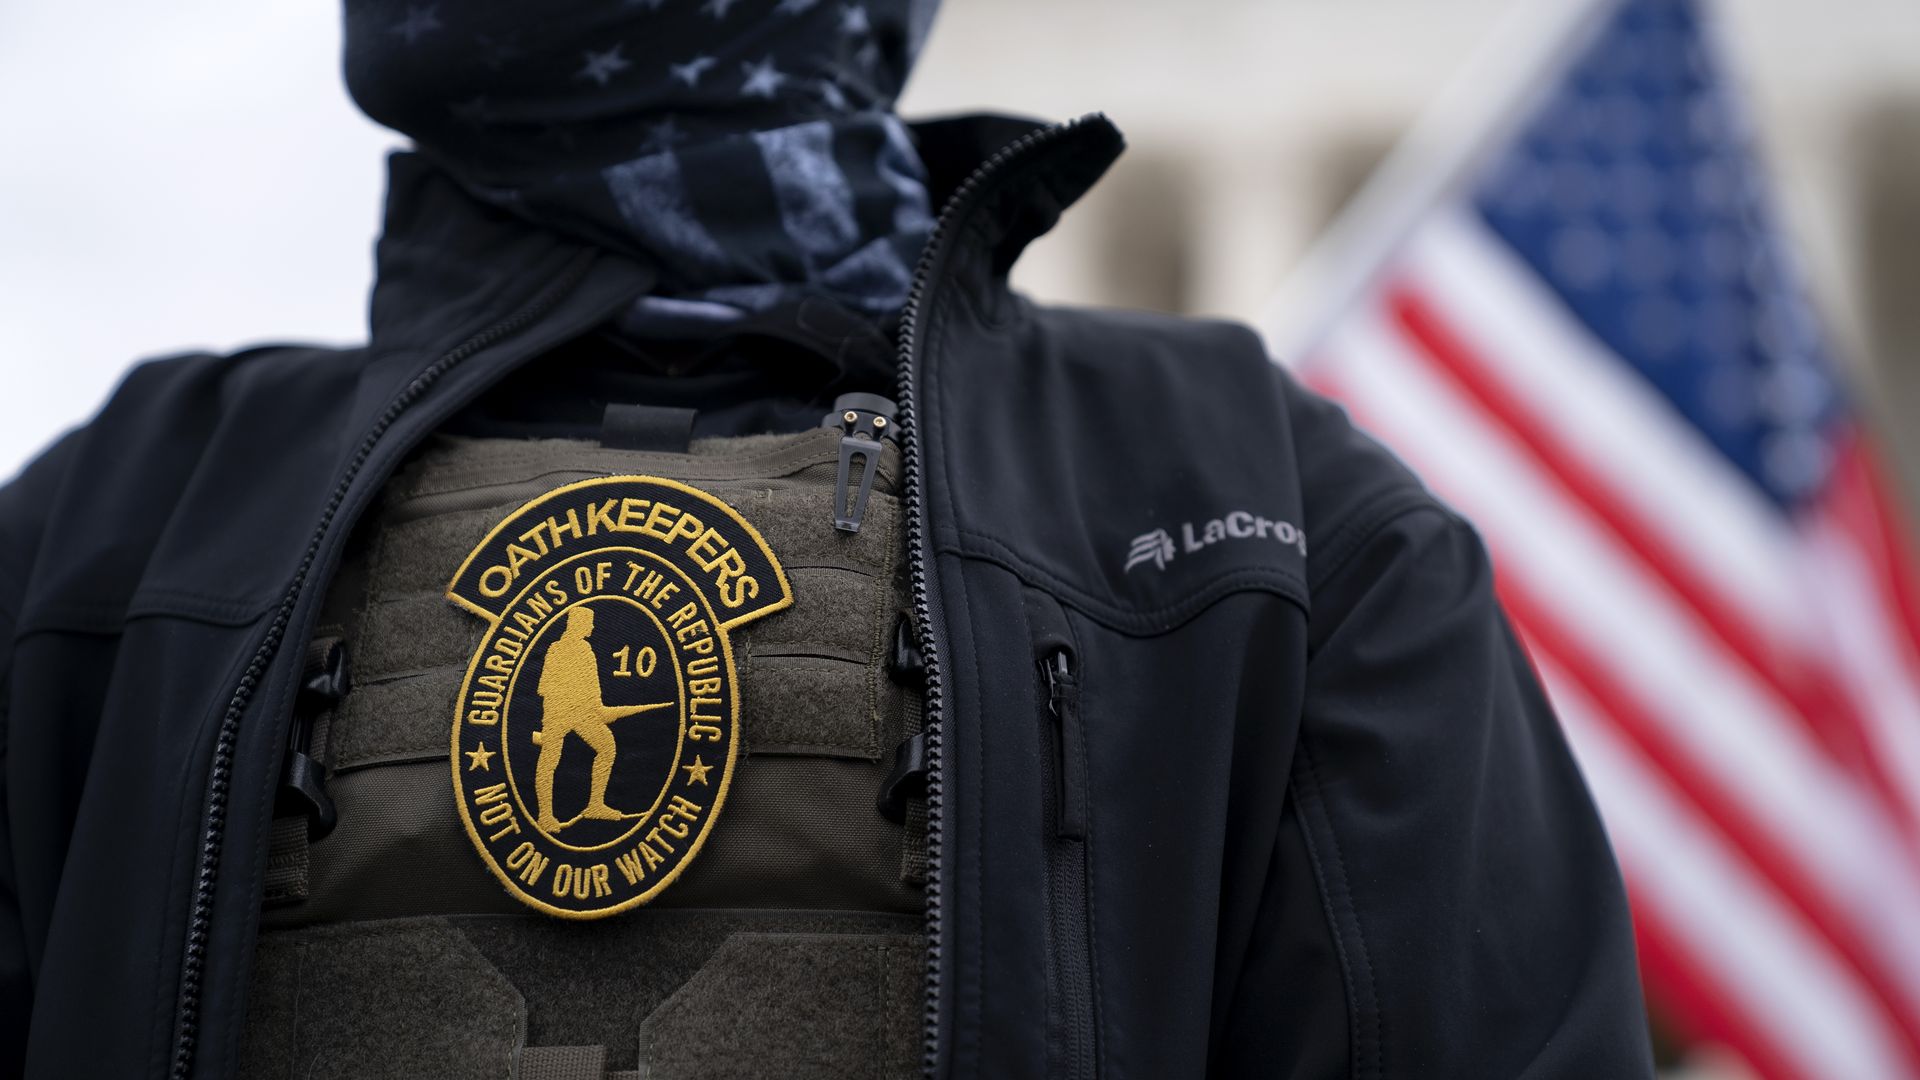 Photo of a person in tactical gear with an Oath Keepers badge